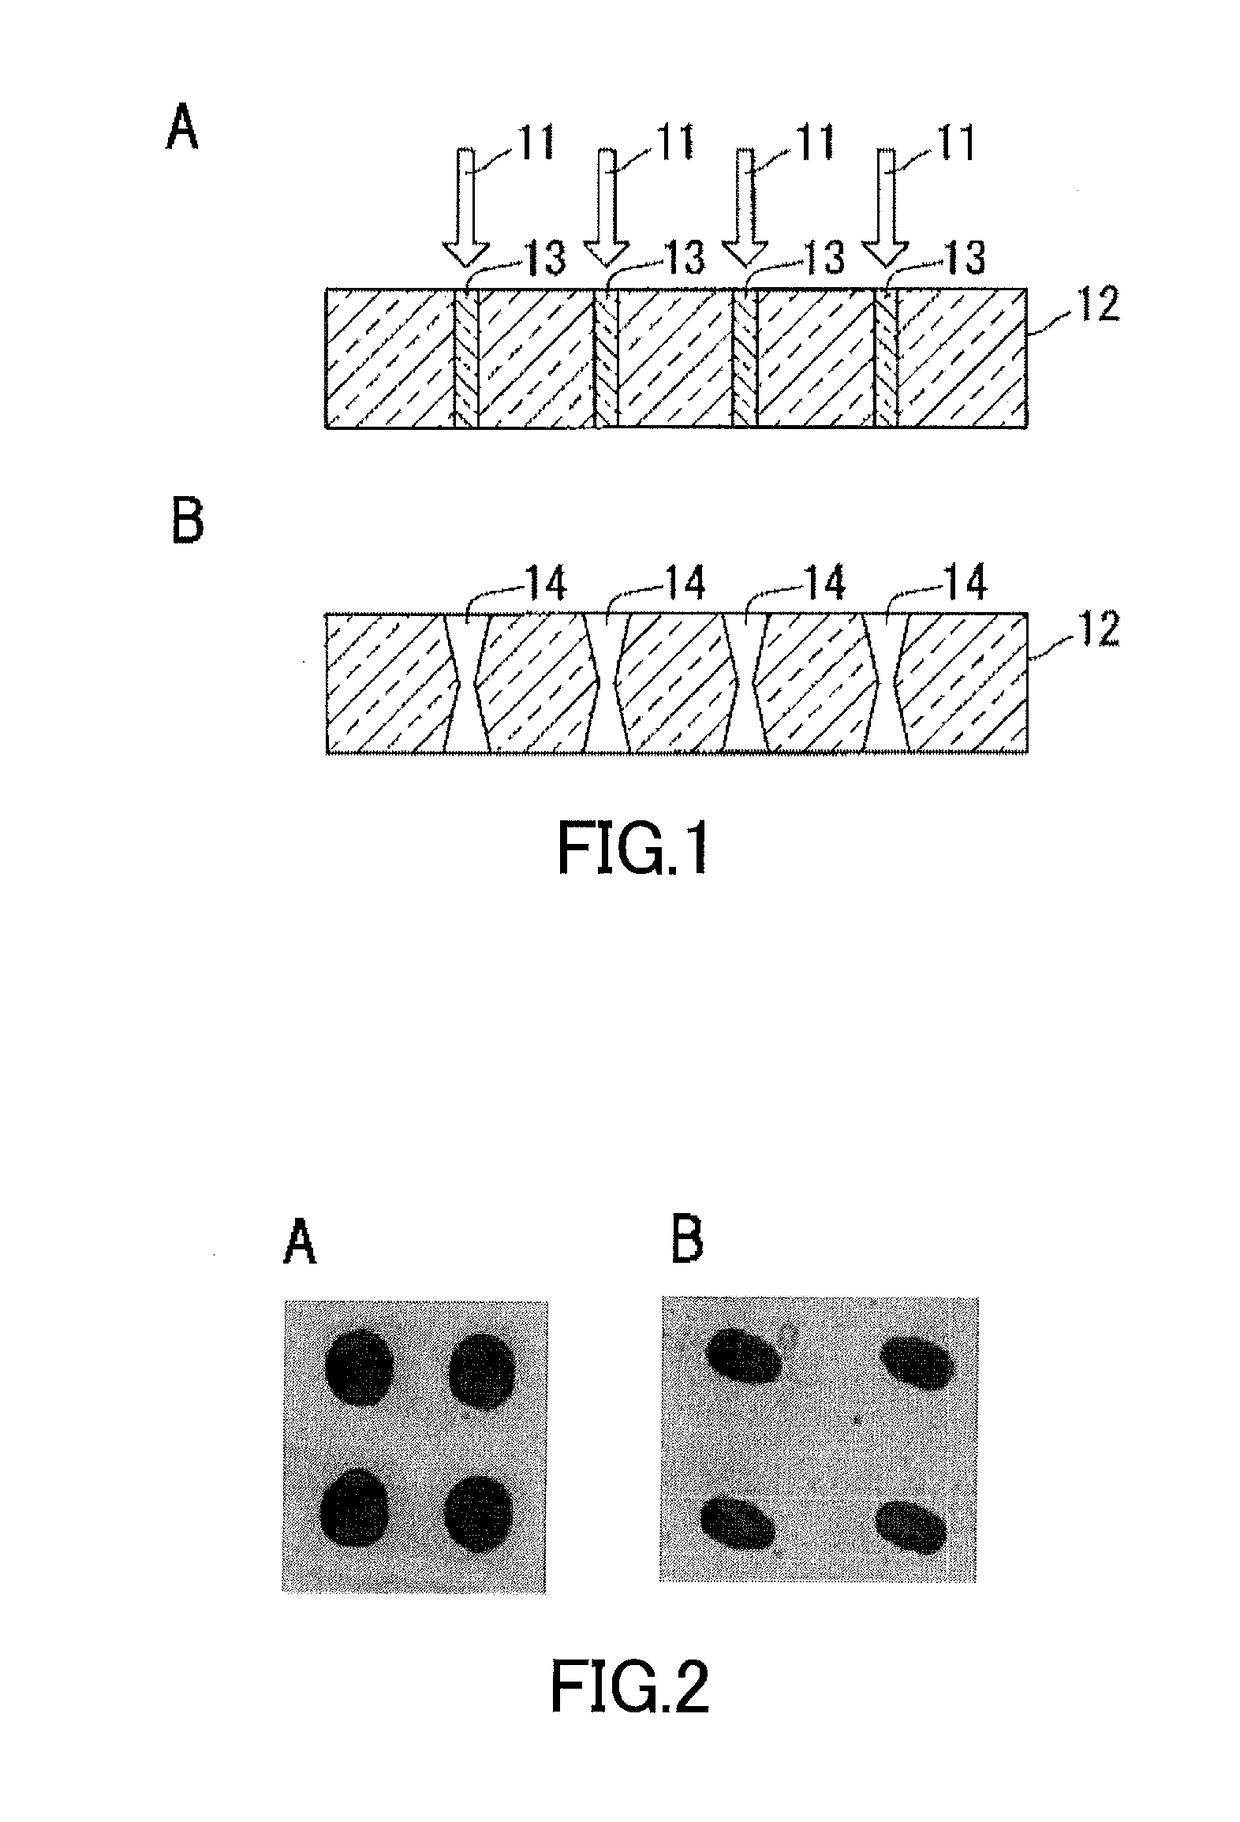 Glass for laser processing and method for producing perforated glass using same